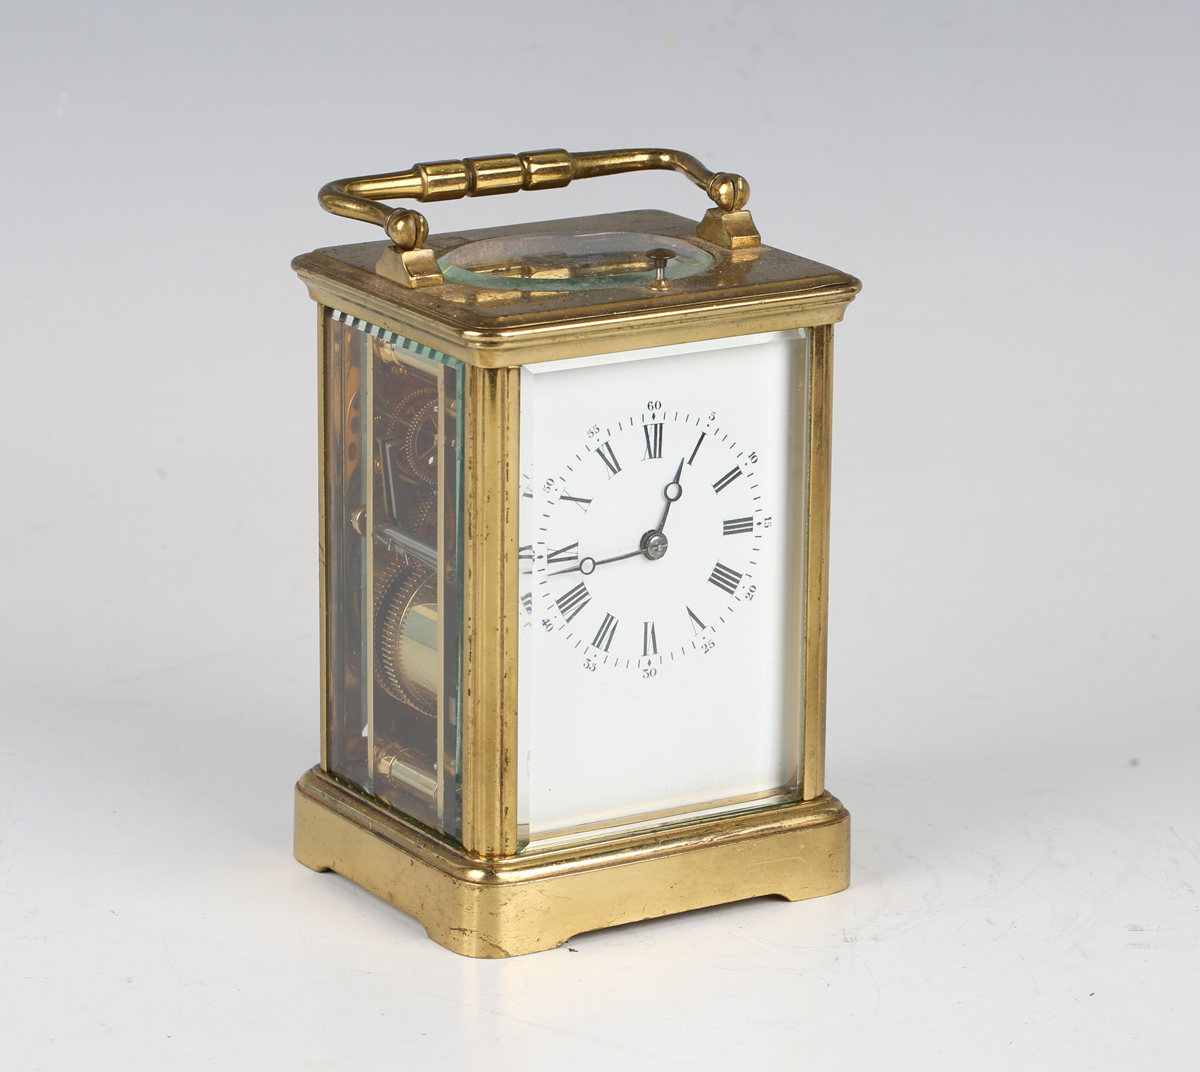 A late 19th century French lacquered brass cased carriage clock with eight day movement striking